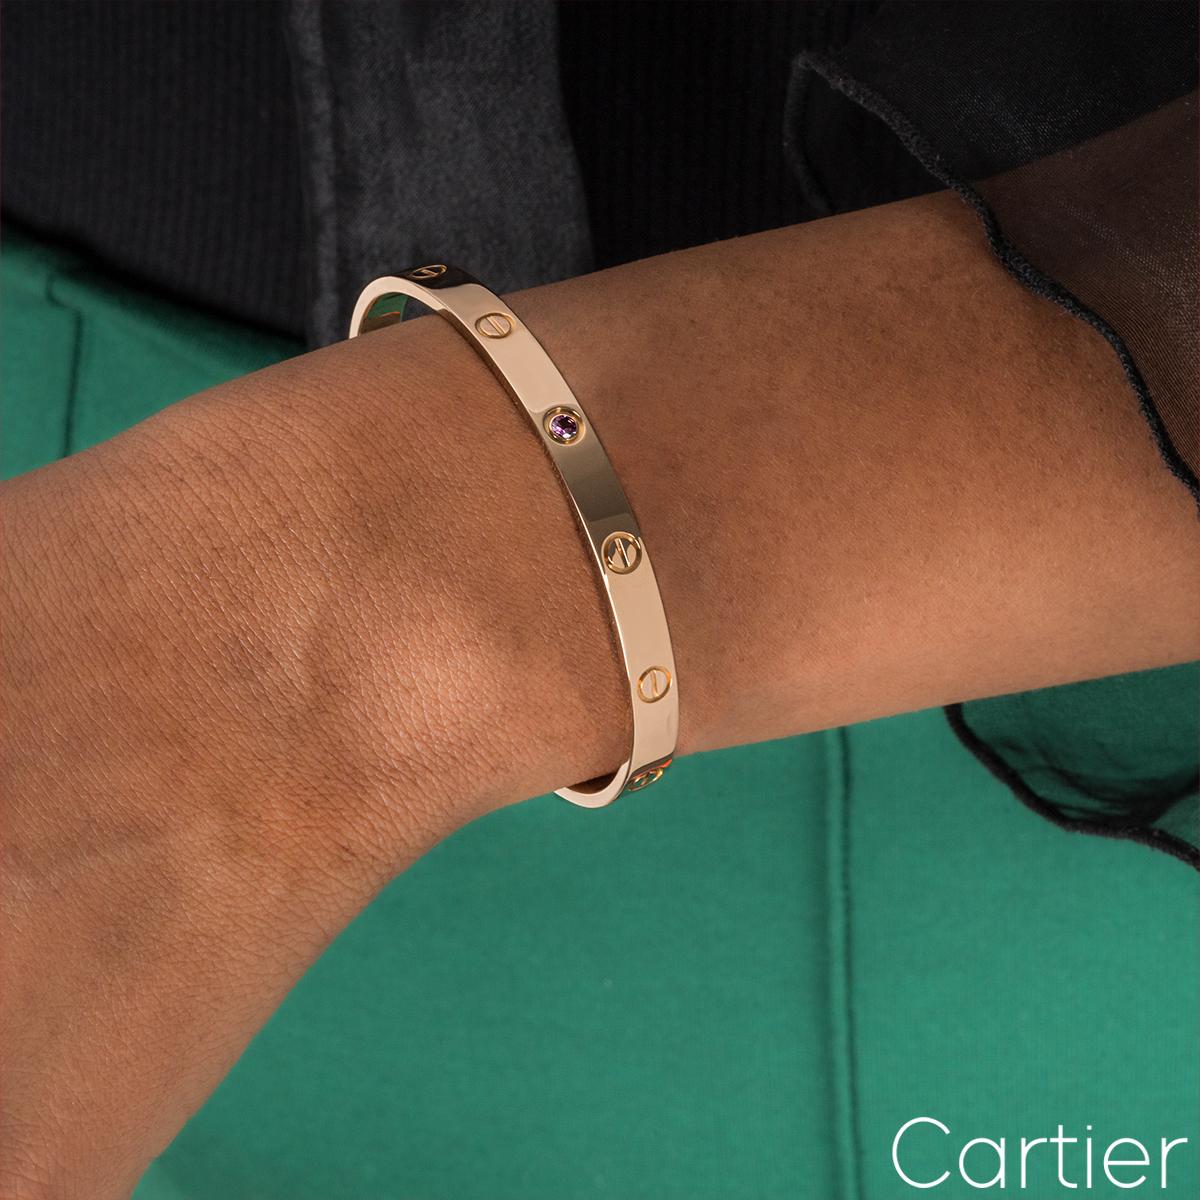 Cartier Rose Gold Pink Sapphire Cuff Love Bracelet Size 19 B6030019 In Excellent Condition For Sale In London, GB